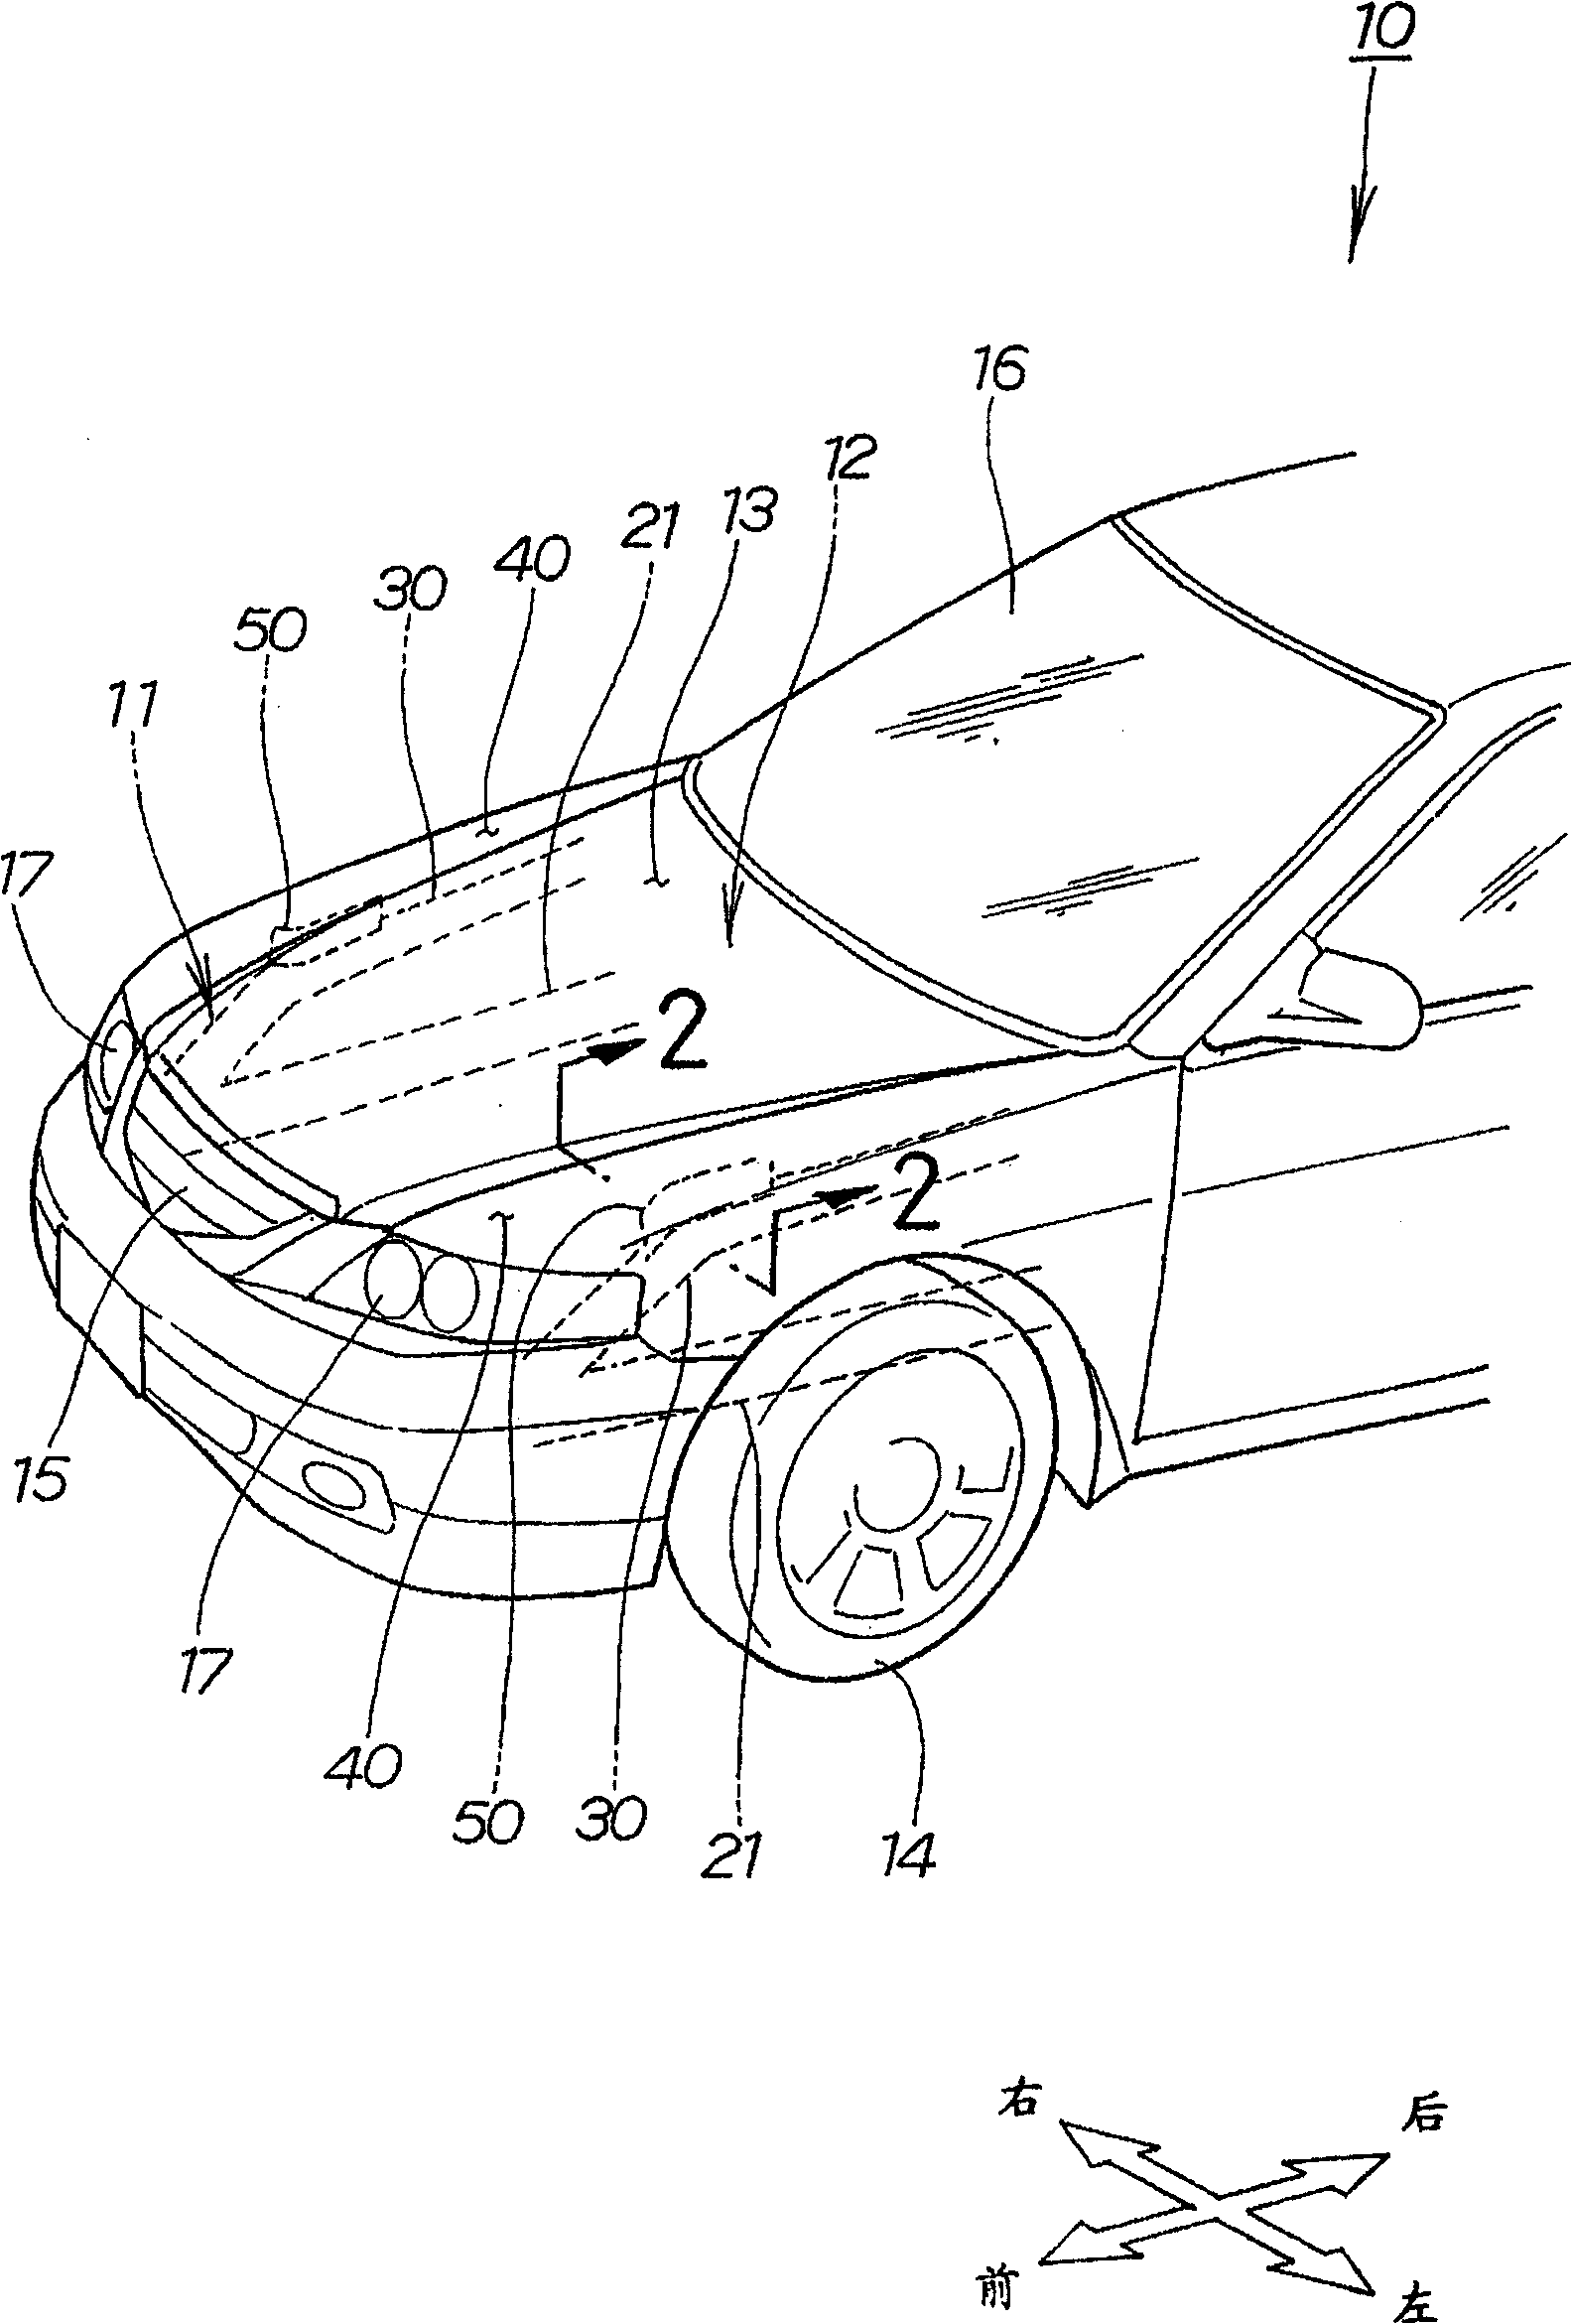 Vehicle front structure